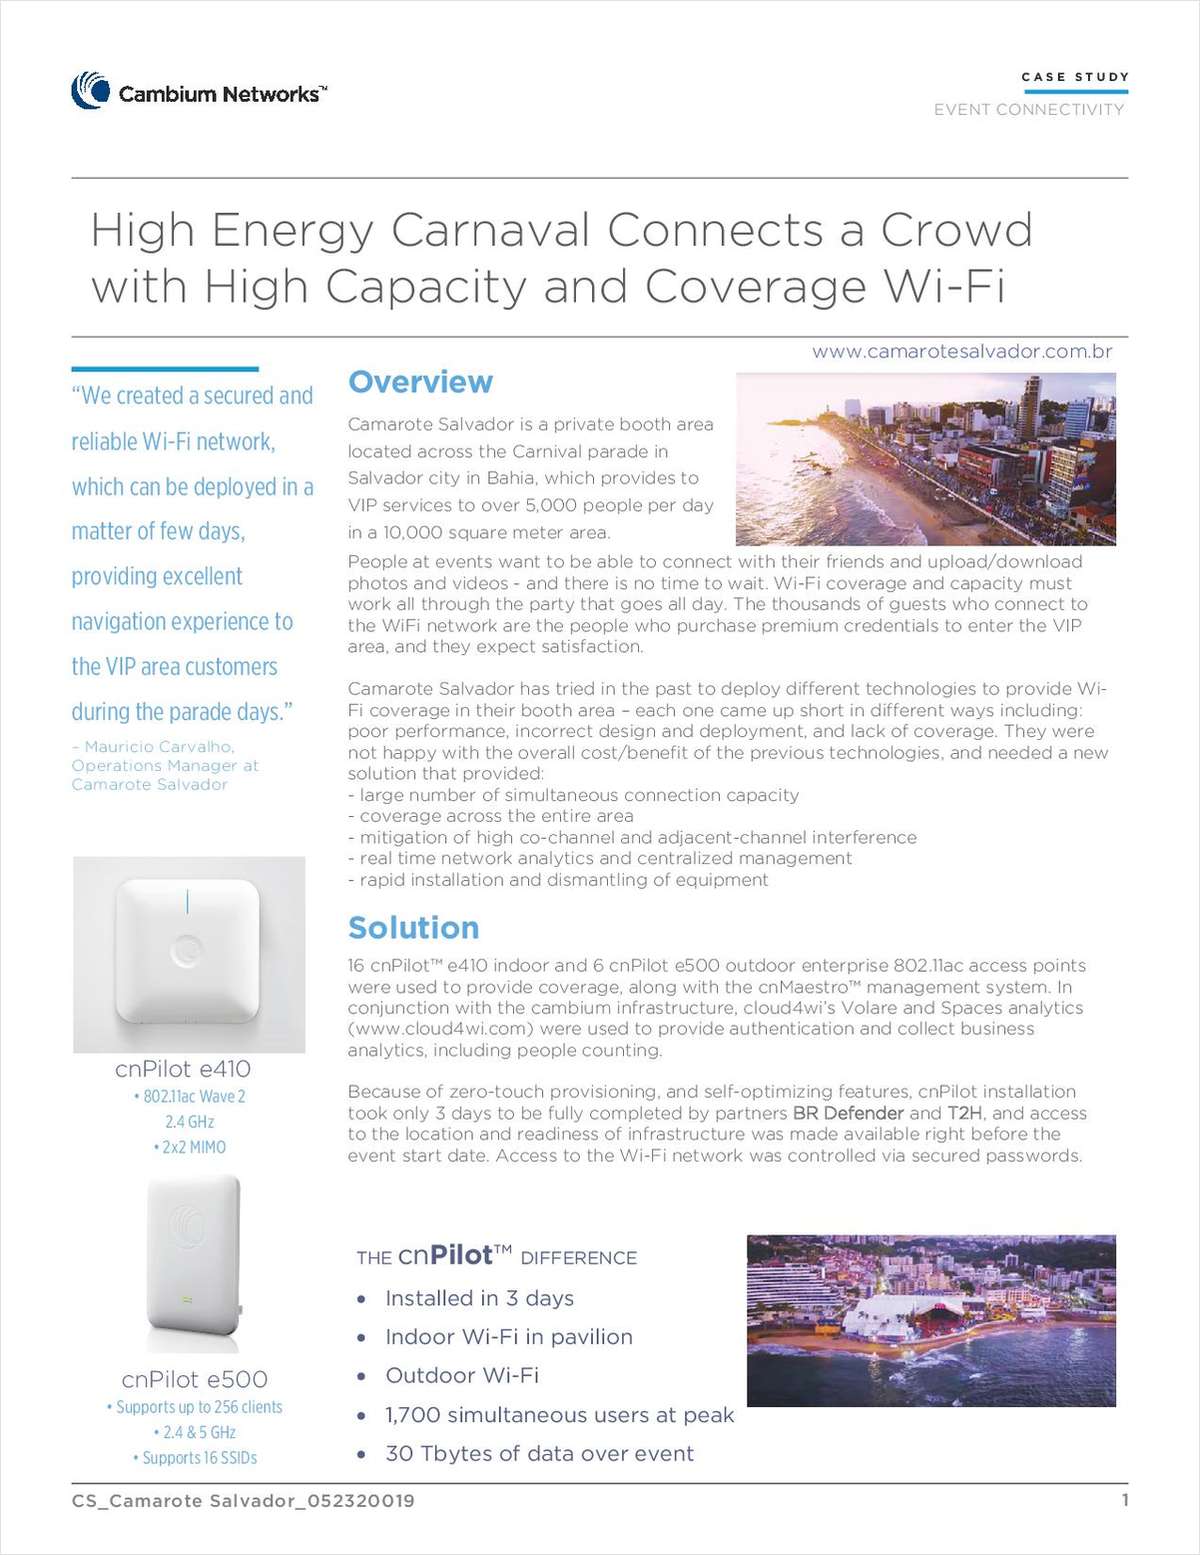 High Energy Carnaval Connects a Crowd with High Capacity and Coverage Wi-Fi